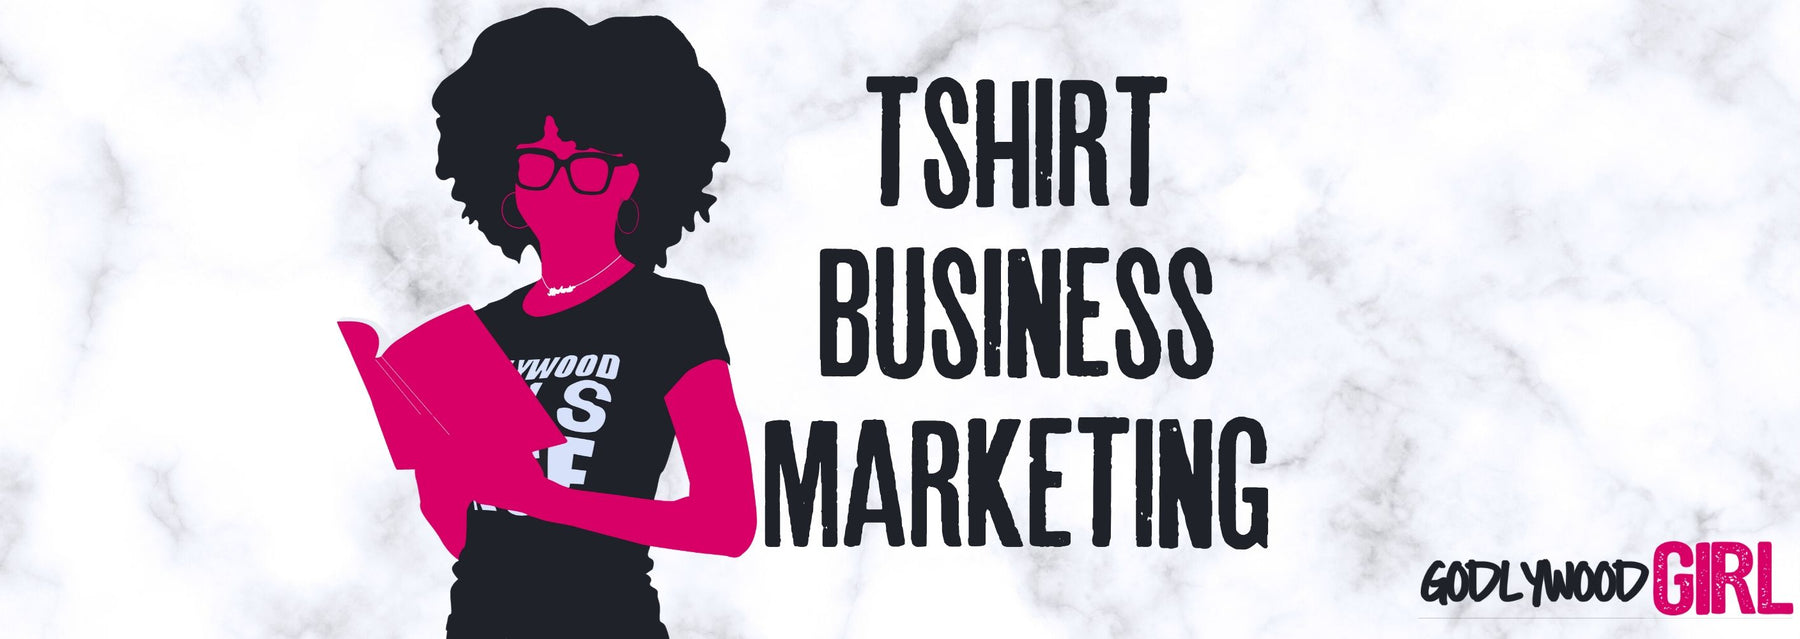 5 Ways To Use Social Media To Promote Your Christian T-Shirt Business | (HOW TO)